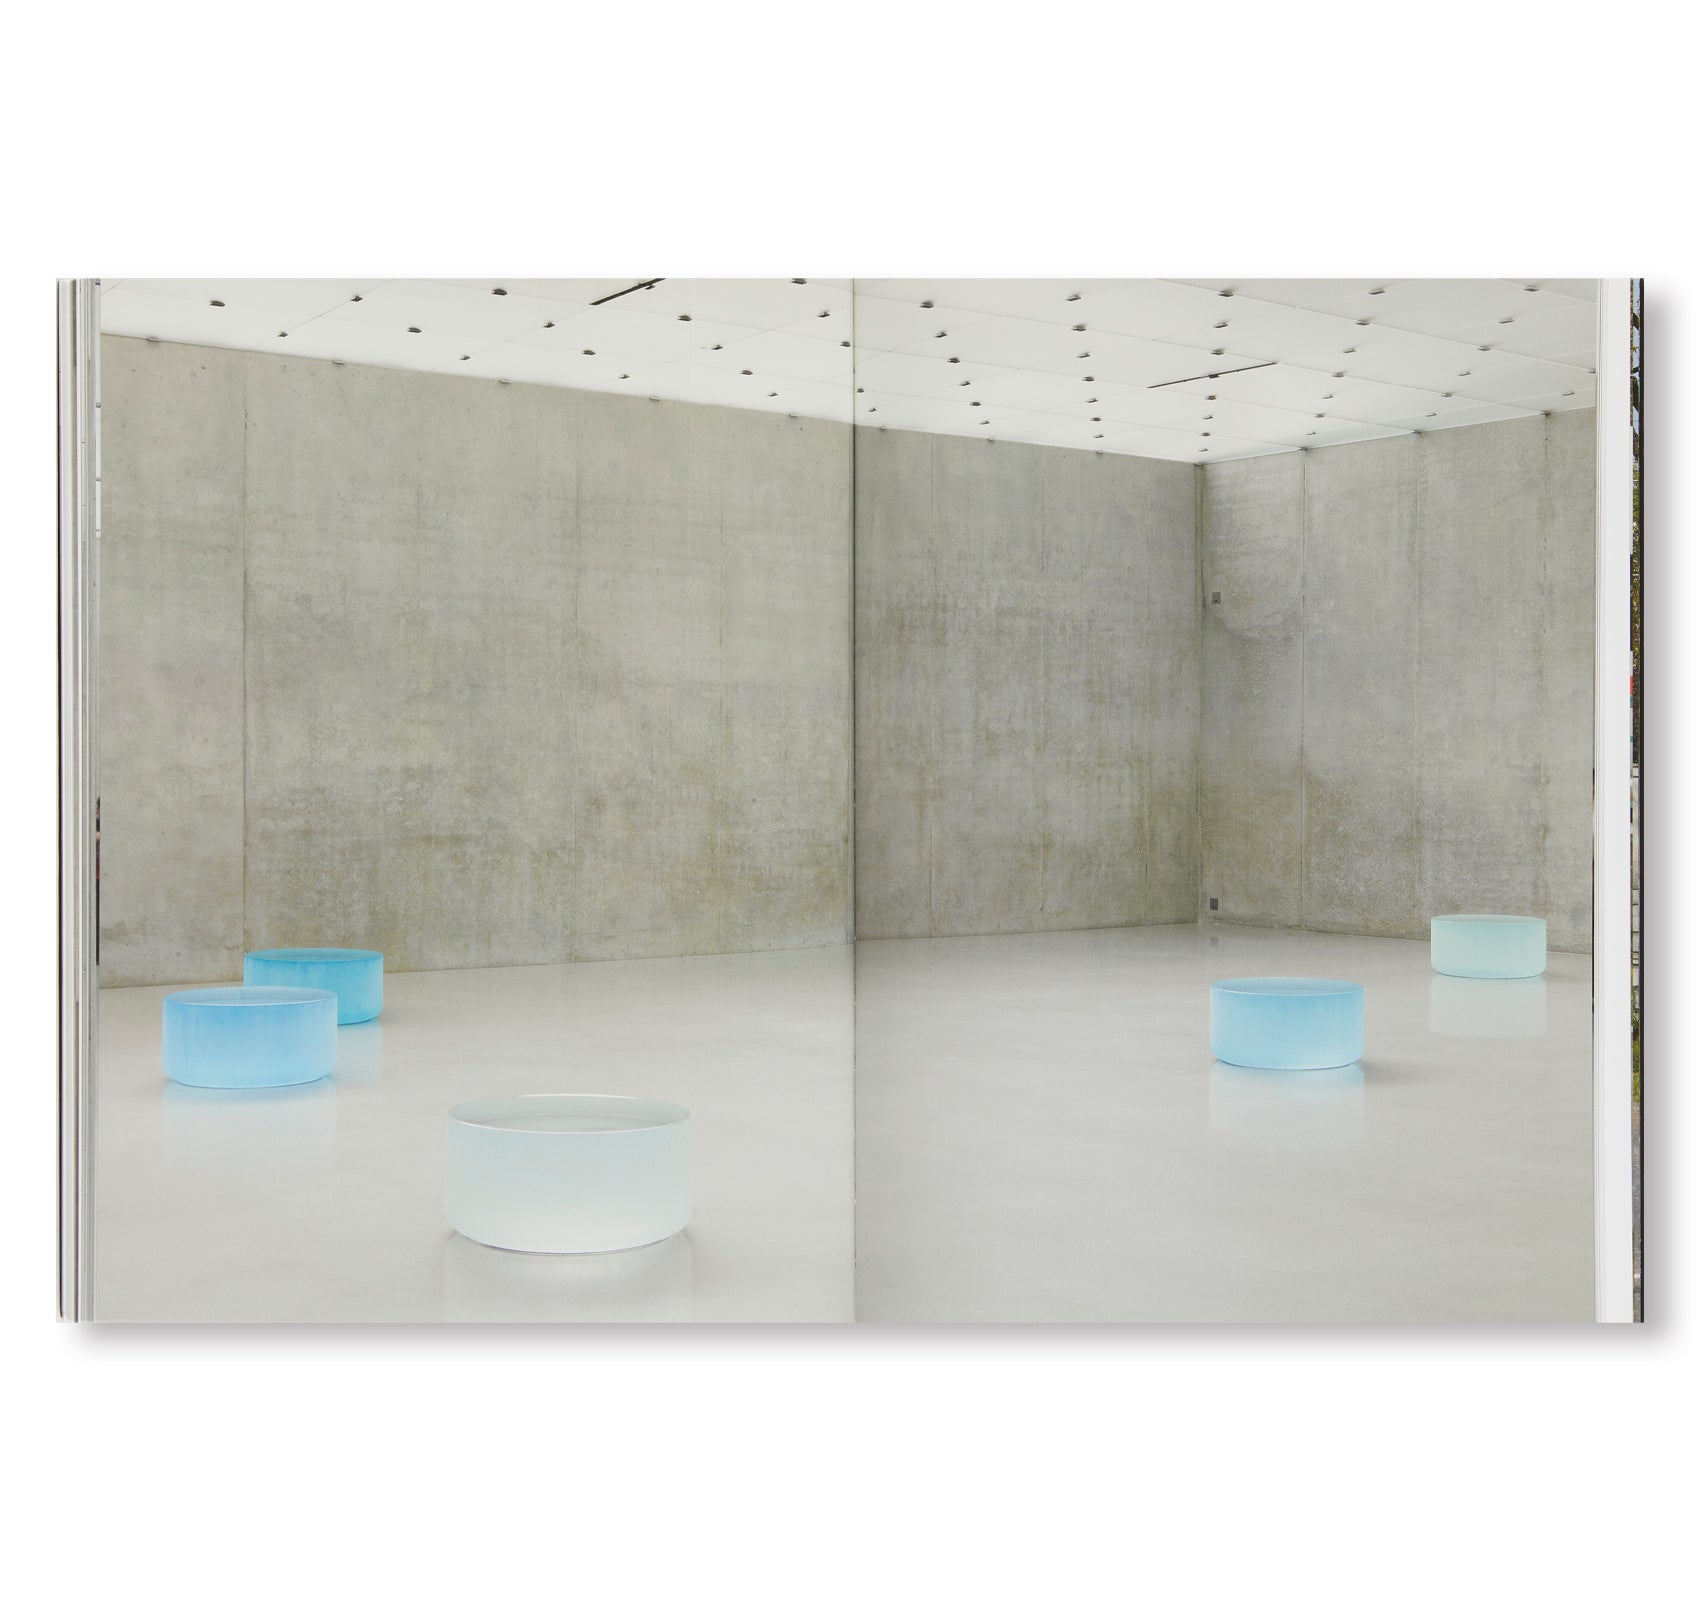 WELL & TRULY by Roni Horn